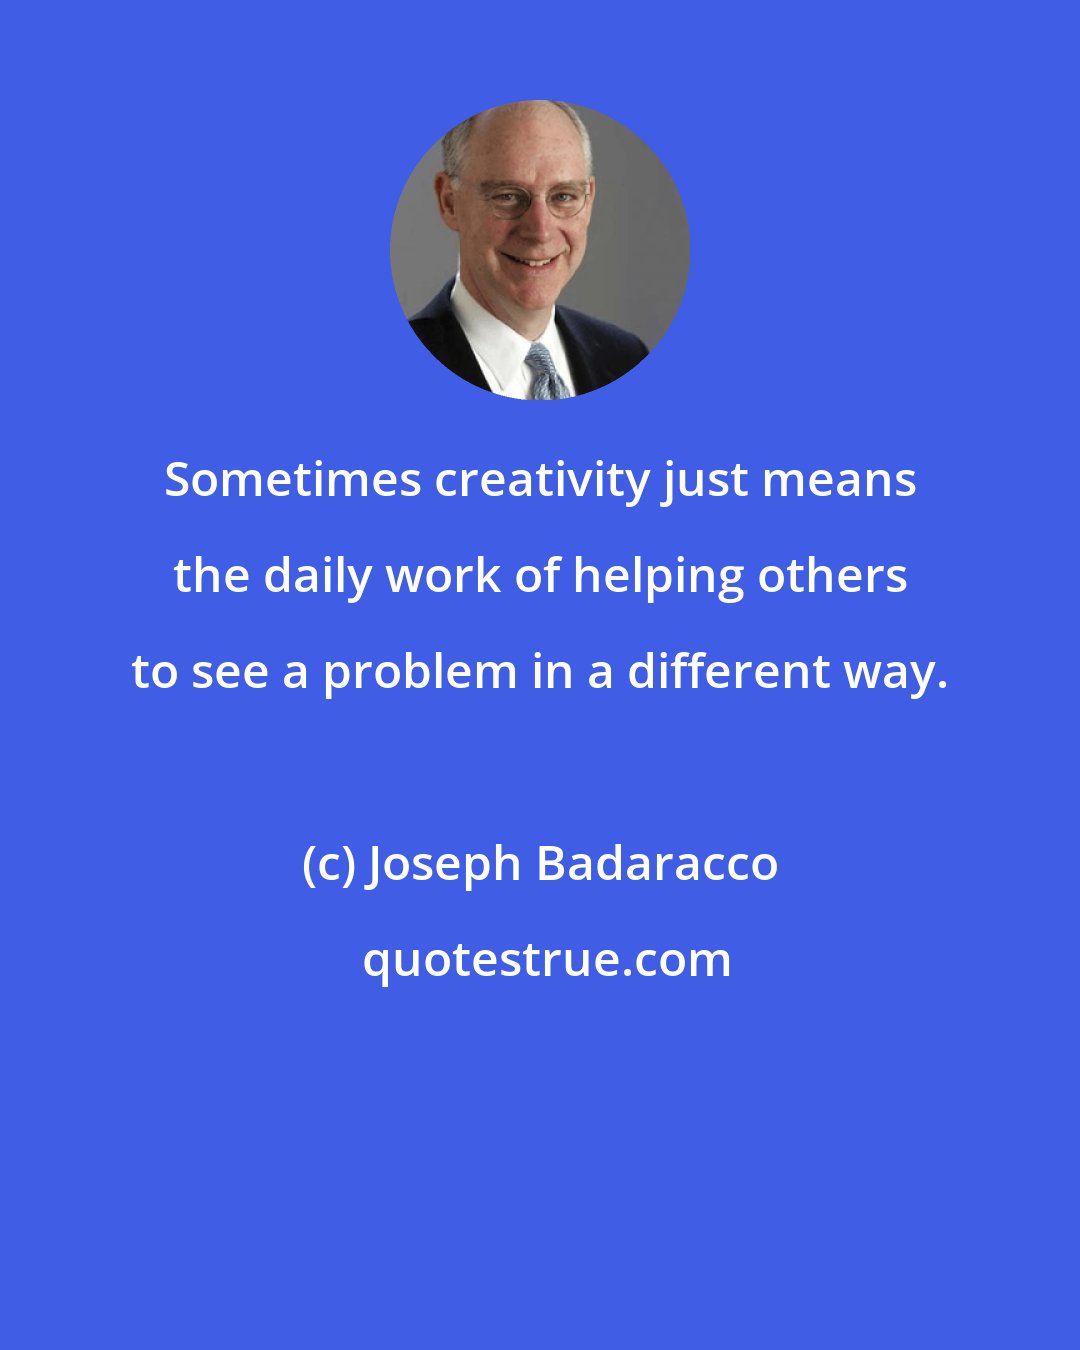 Joseph Badaracco: Sometimes creativity just means the daily work of helping others to see a problem in a different way.